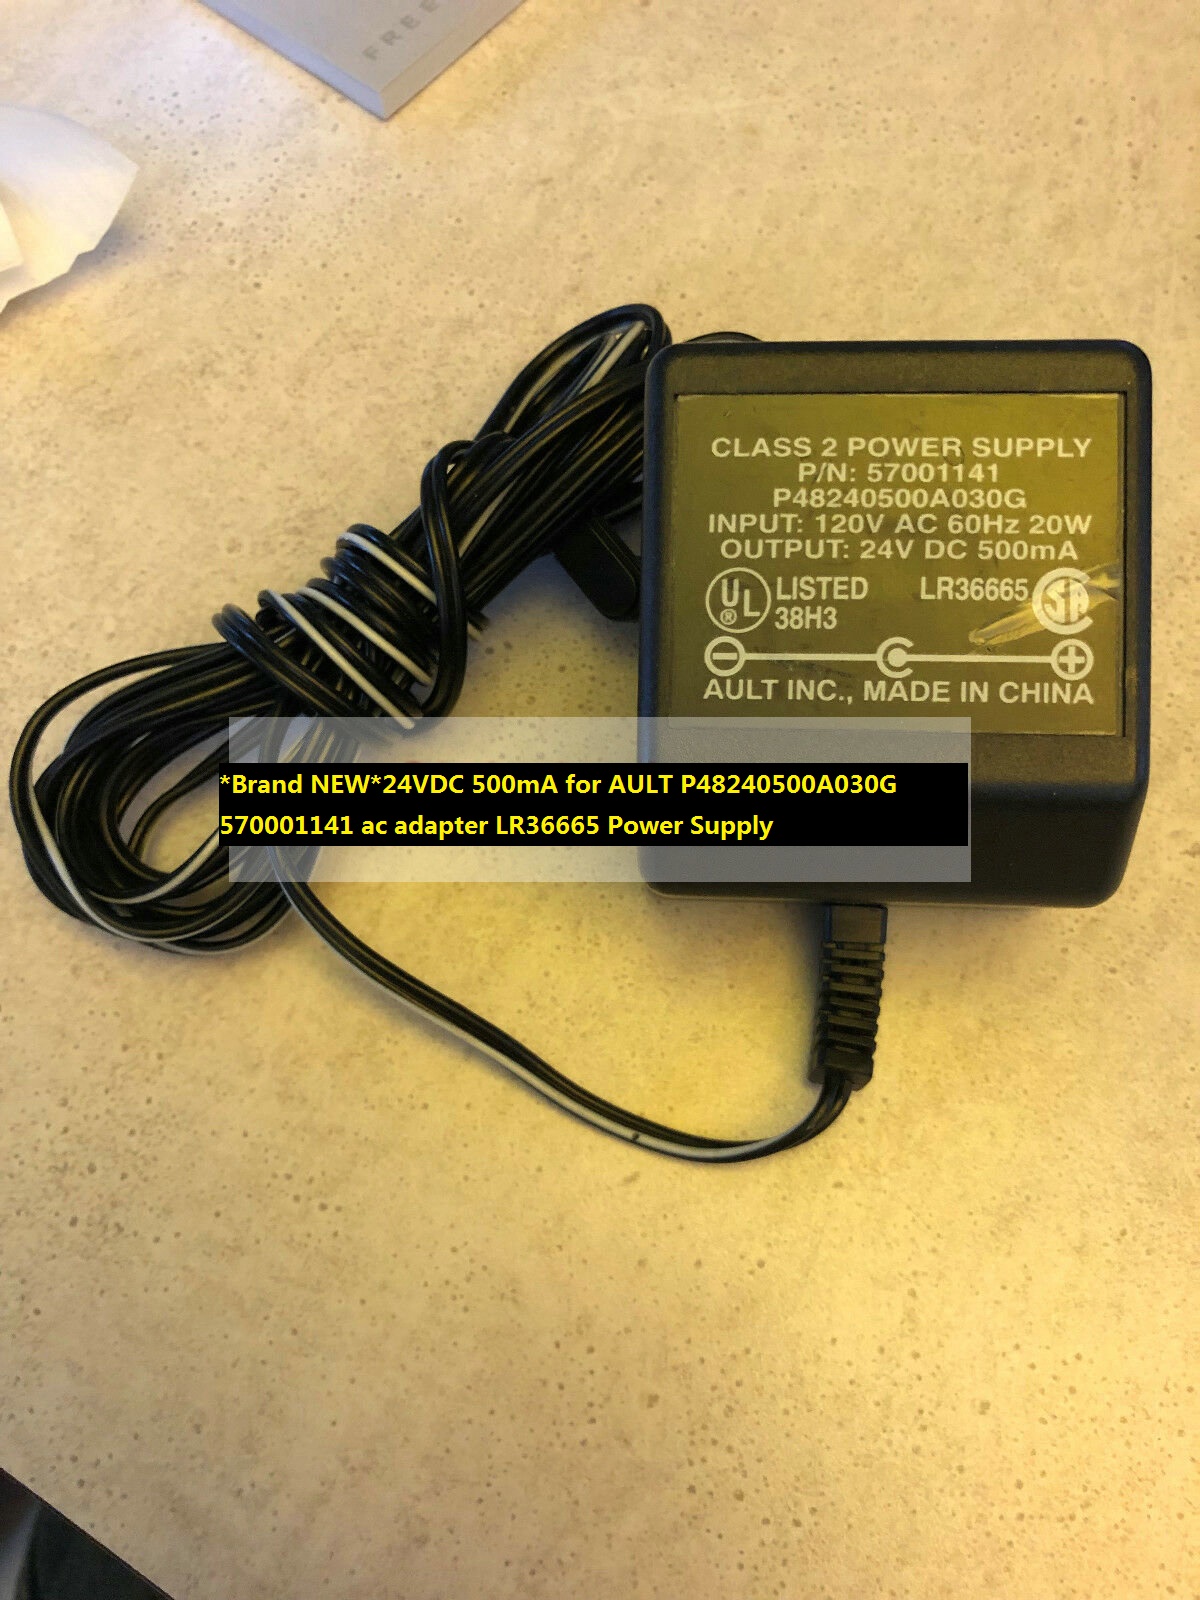 *Brand NEW*24VDC 500mA for AULT P48240500A030G 570001141 ac adapter LR36665 Power Supply